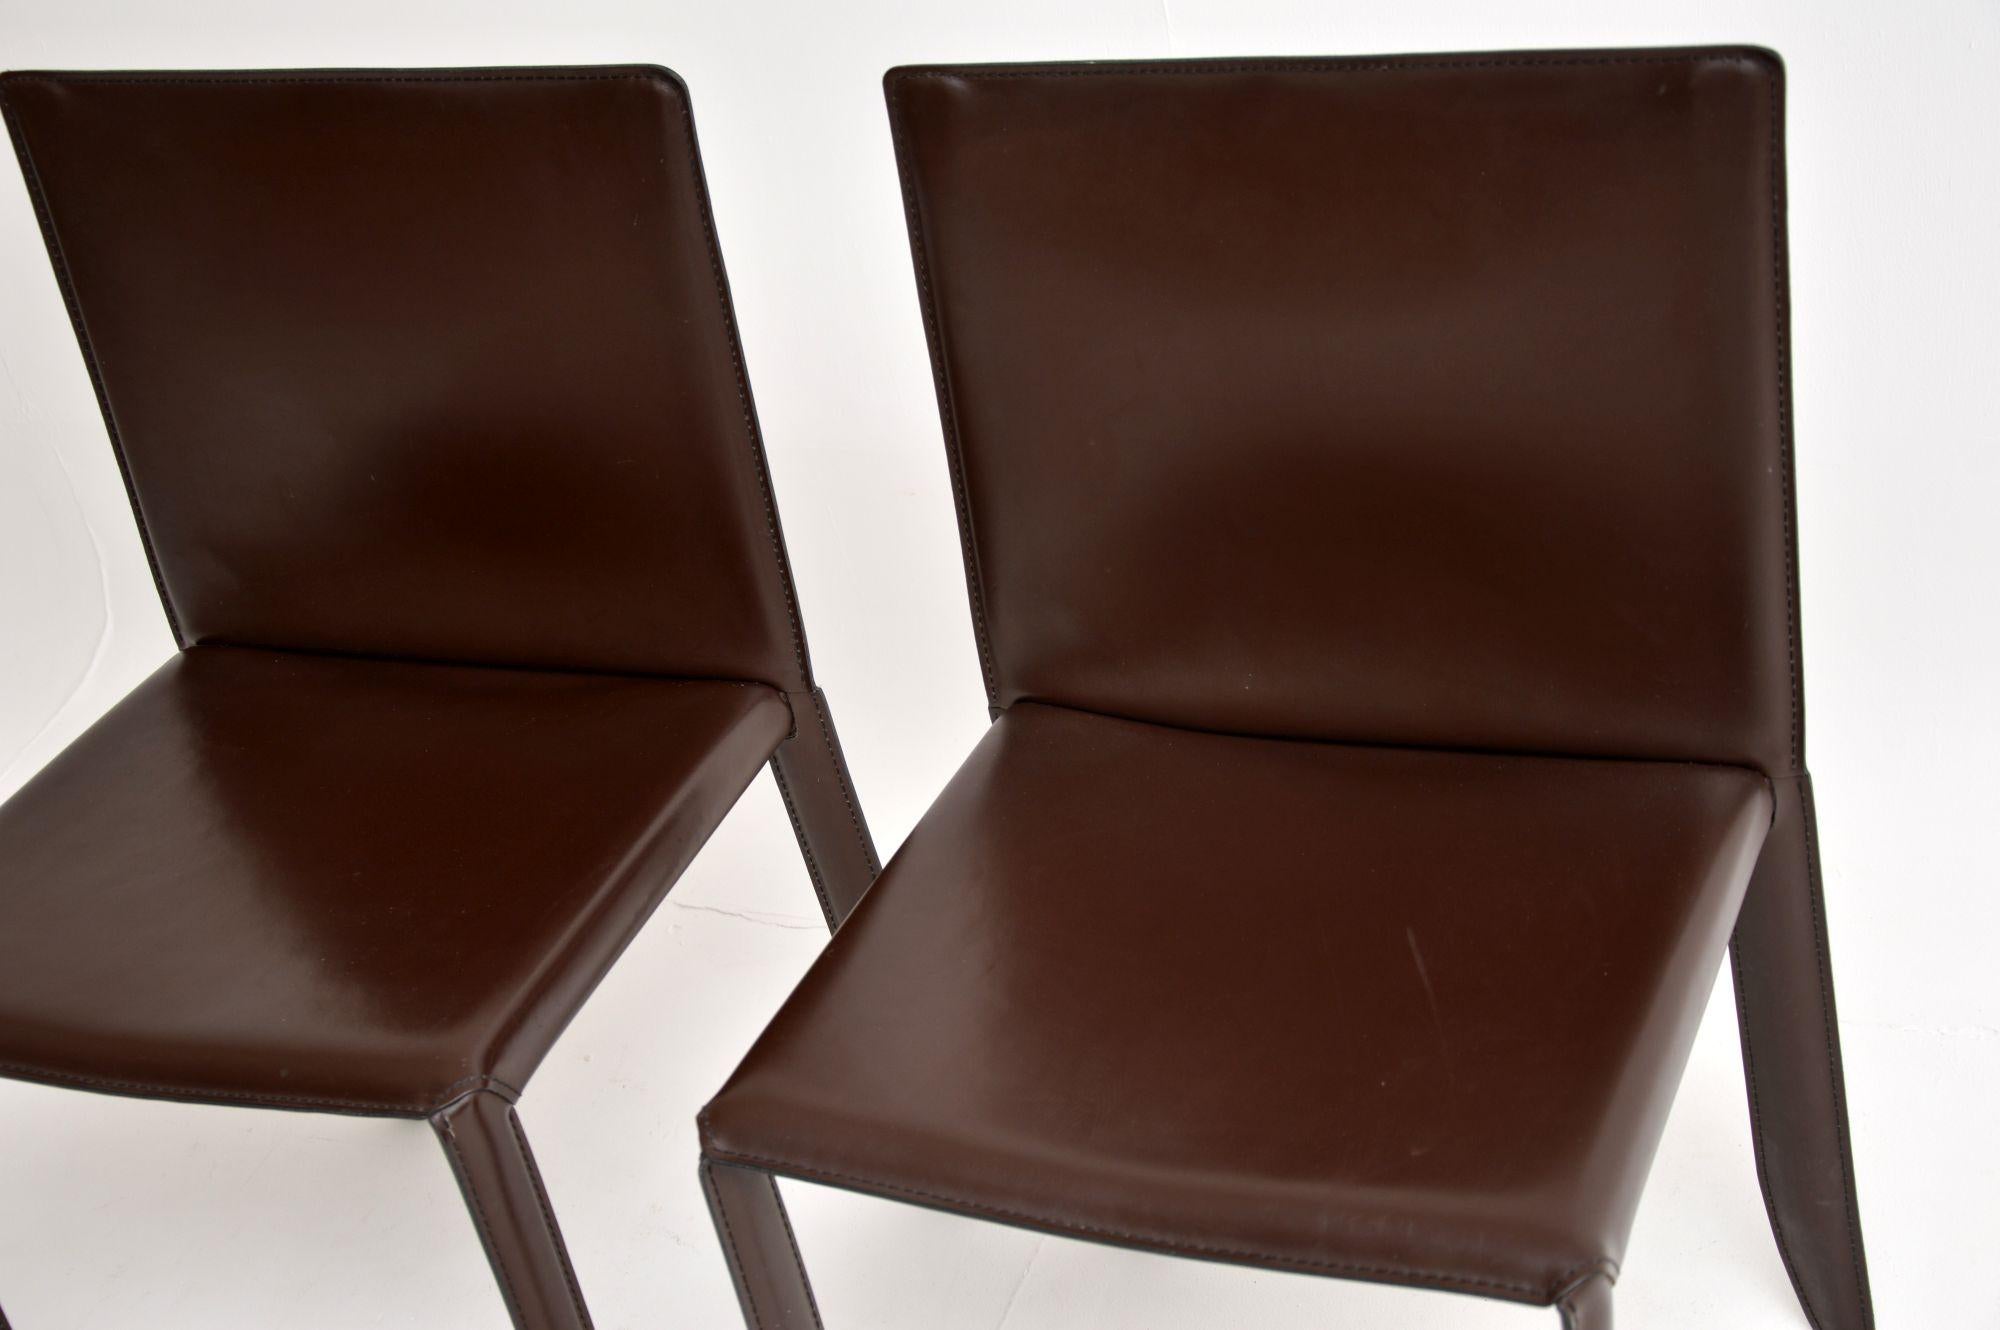 Pair of Modernist Italian Leather Side Chairs by Cattelan Italia 3